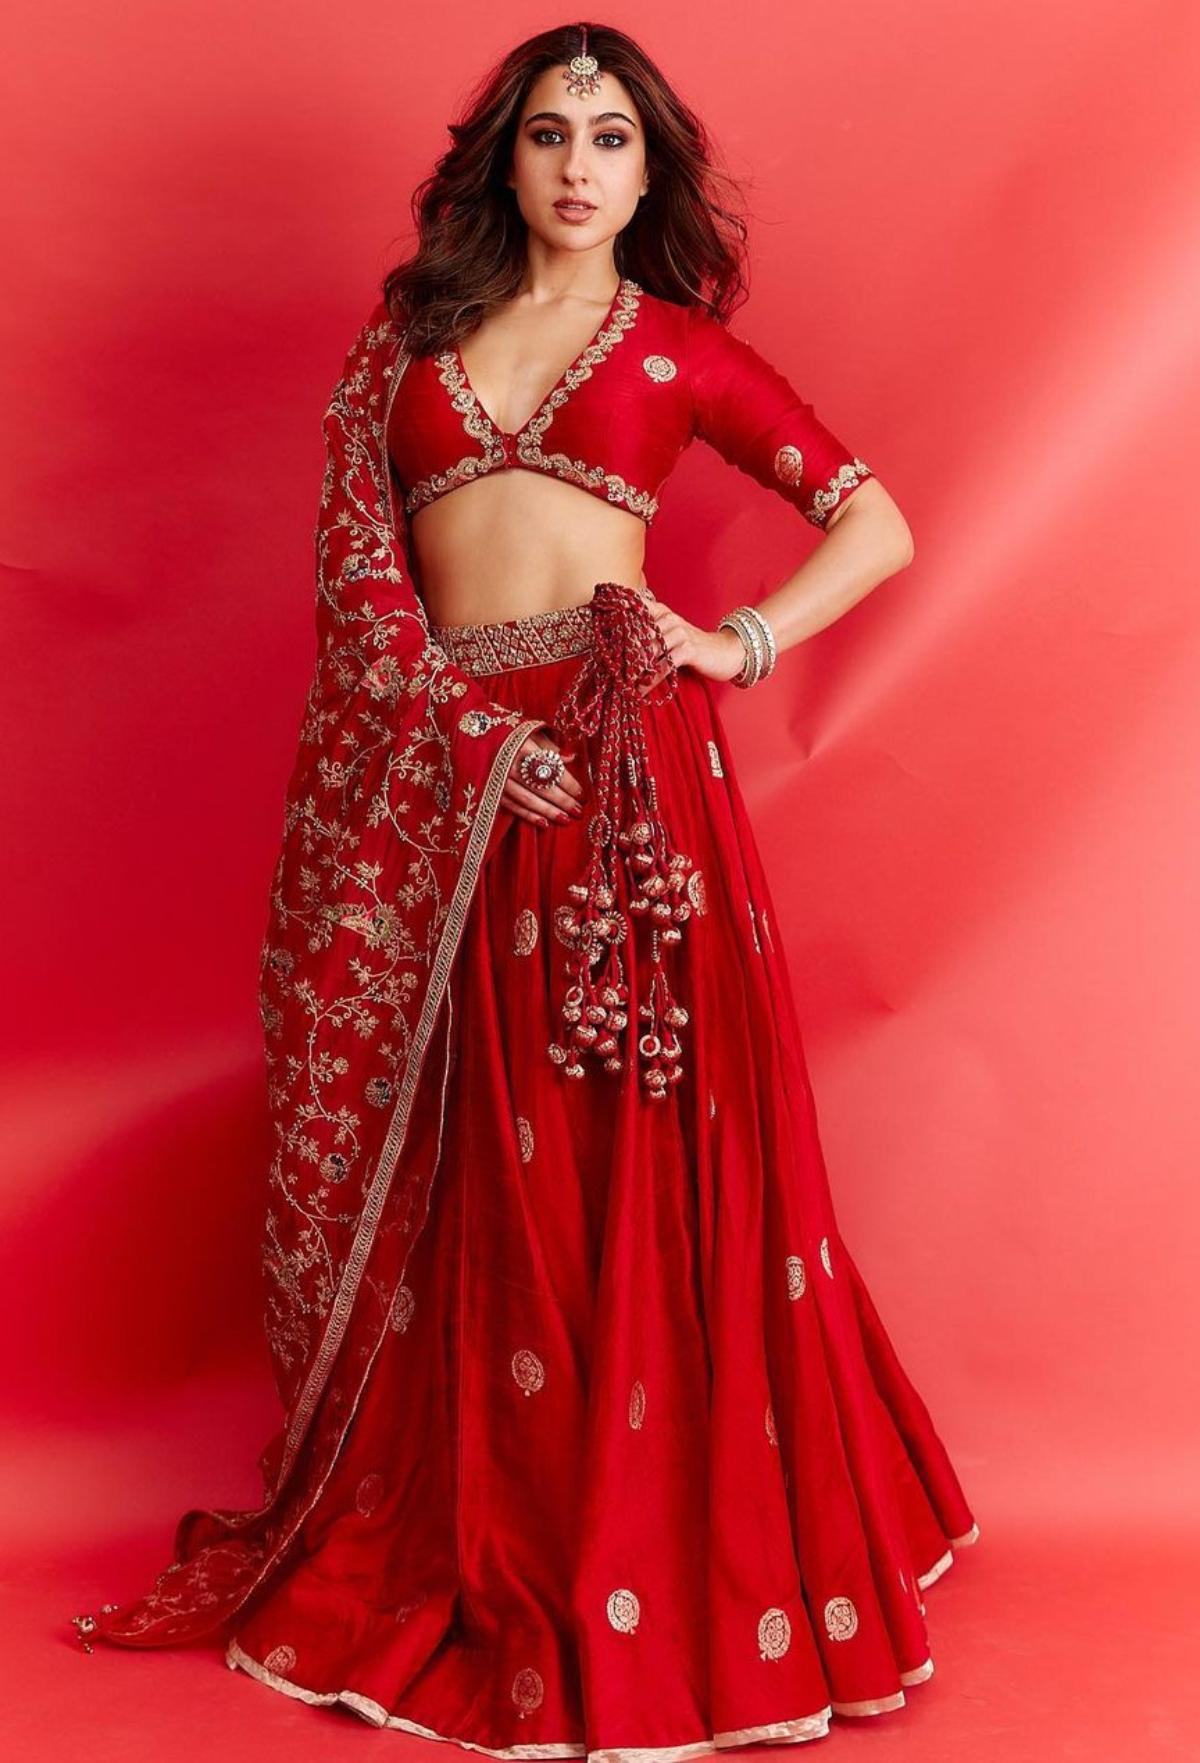 Sara Ali Khan who stole the show donning a ravishing red embroidered lehenga with a plunging v-neck, looks every bit of royalty. The actor who played muse for fashion designer Punit Balana at the recently held Lakme Fashion Week 2023, in the same red lehenga, made netizens go gaga over her effortless elan and unmatched beauty. The enchantress who flaunted her curves in the bespoke red lehenga, looked like a dope millennial bride as she accessorised her extravagant ethnic look with a maang tika and statement bangles. 